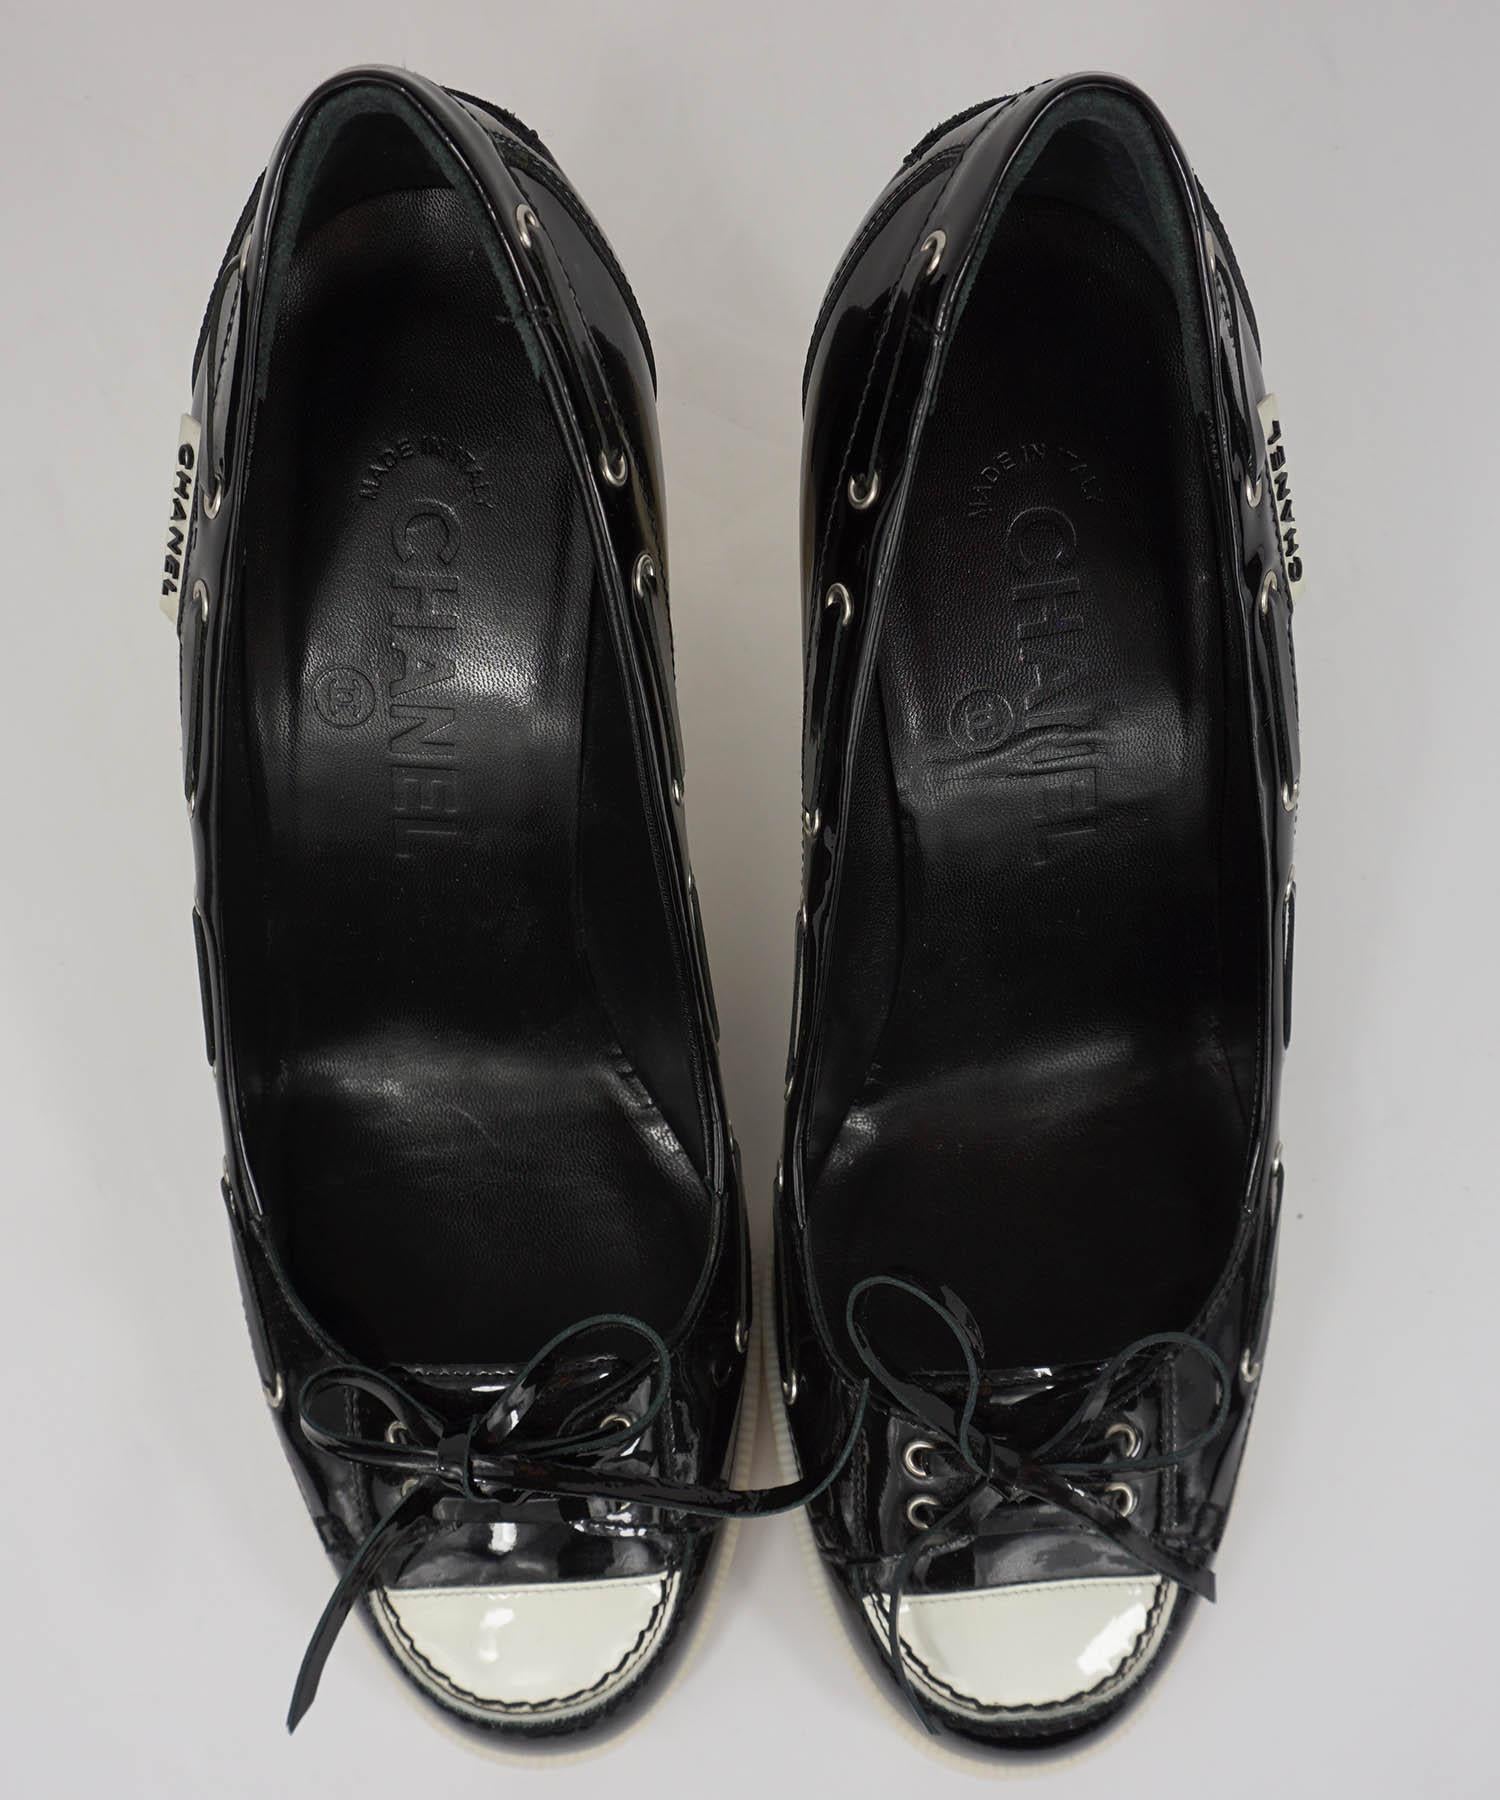 Women's Chanel Black and White Patent Leather Boat Shoe Pumps Size 38 For Sale